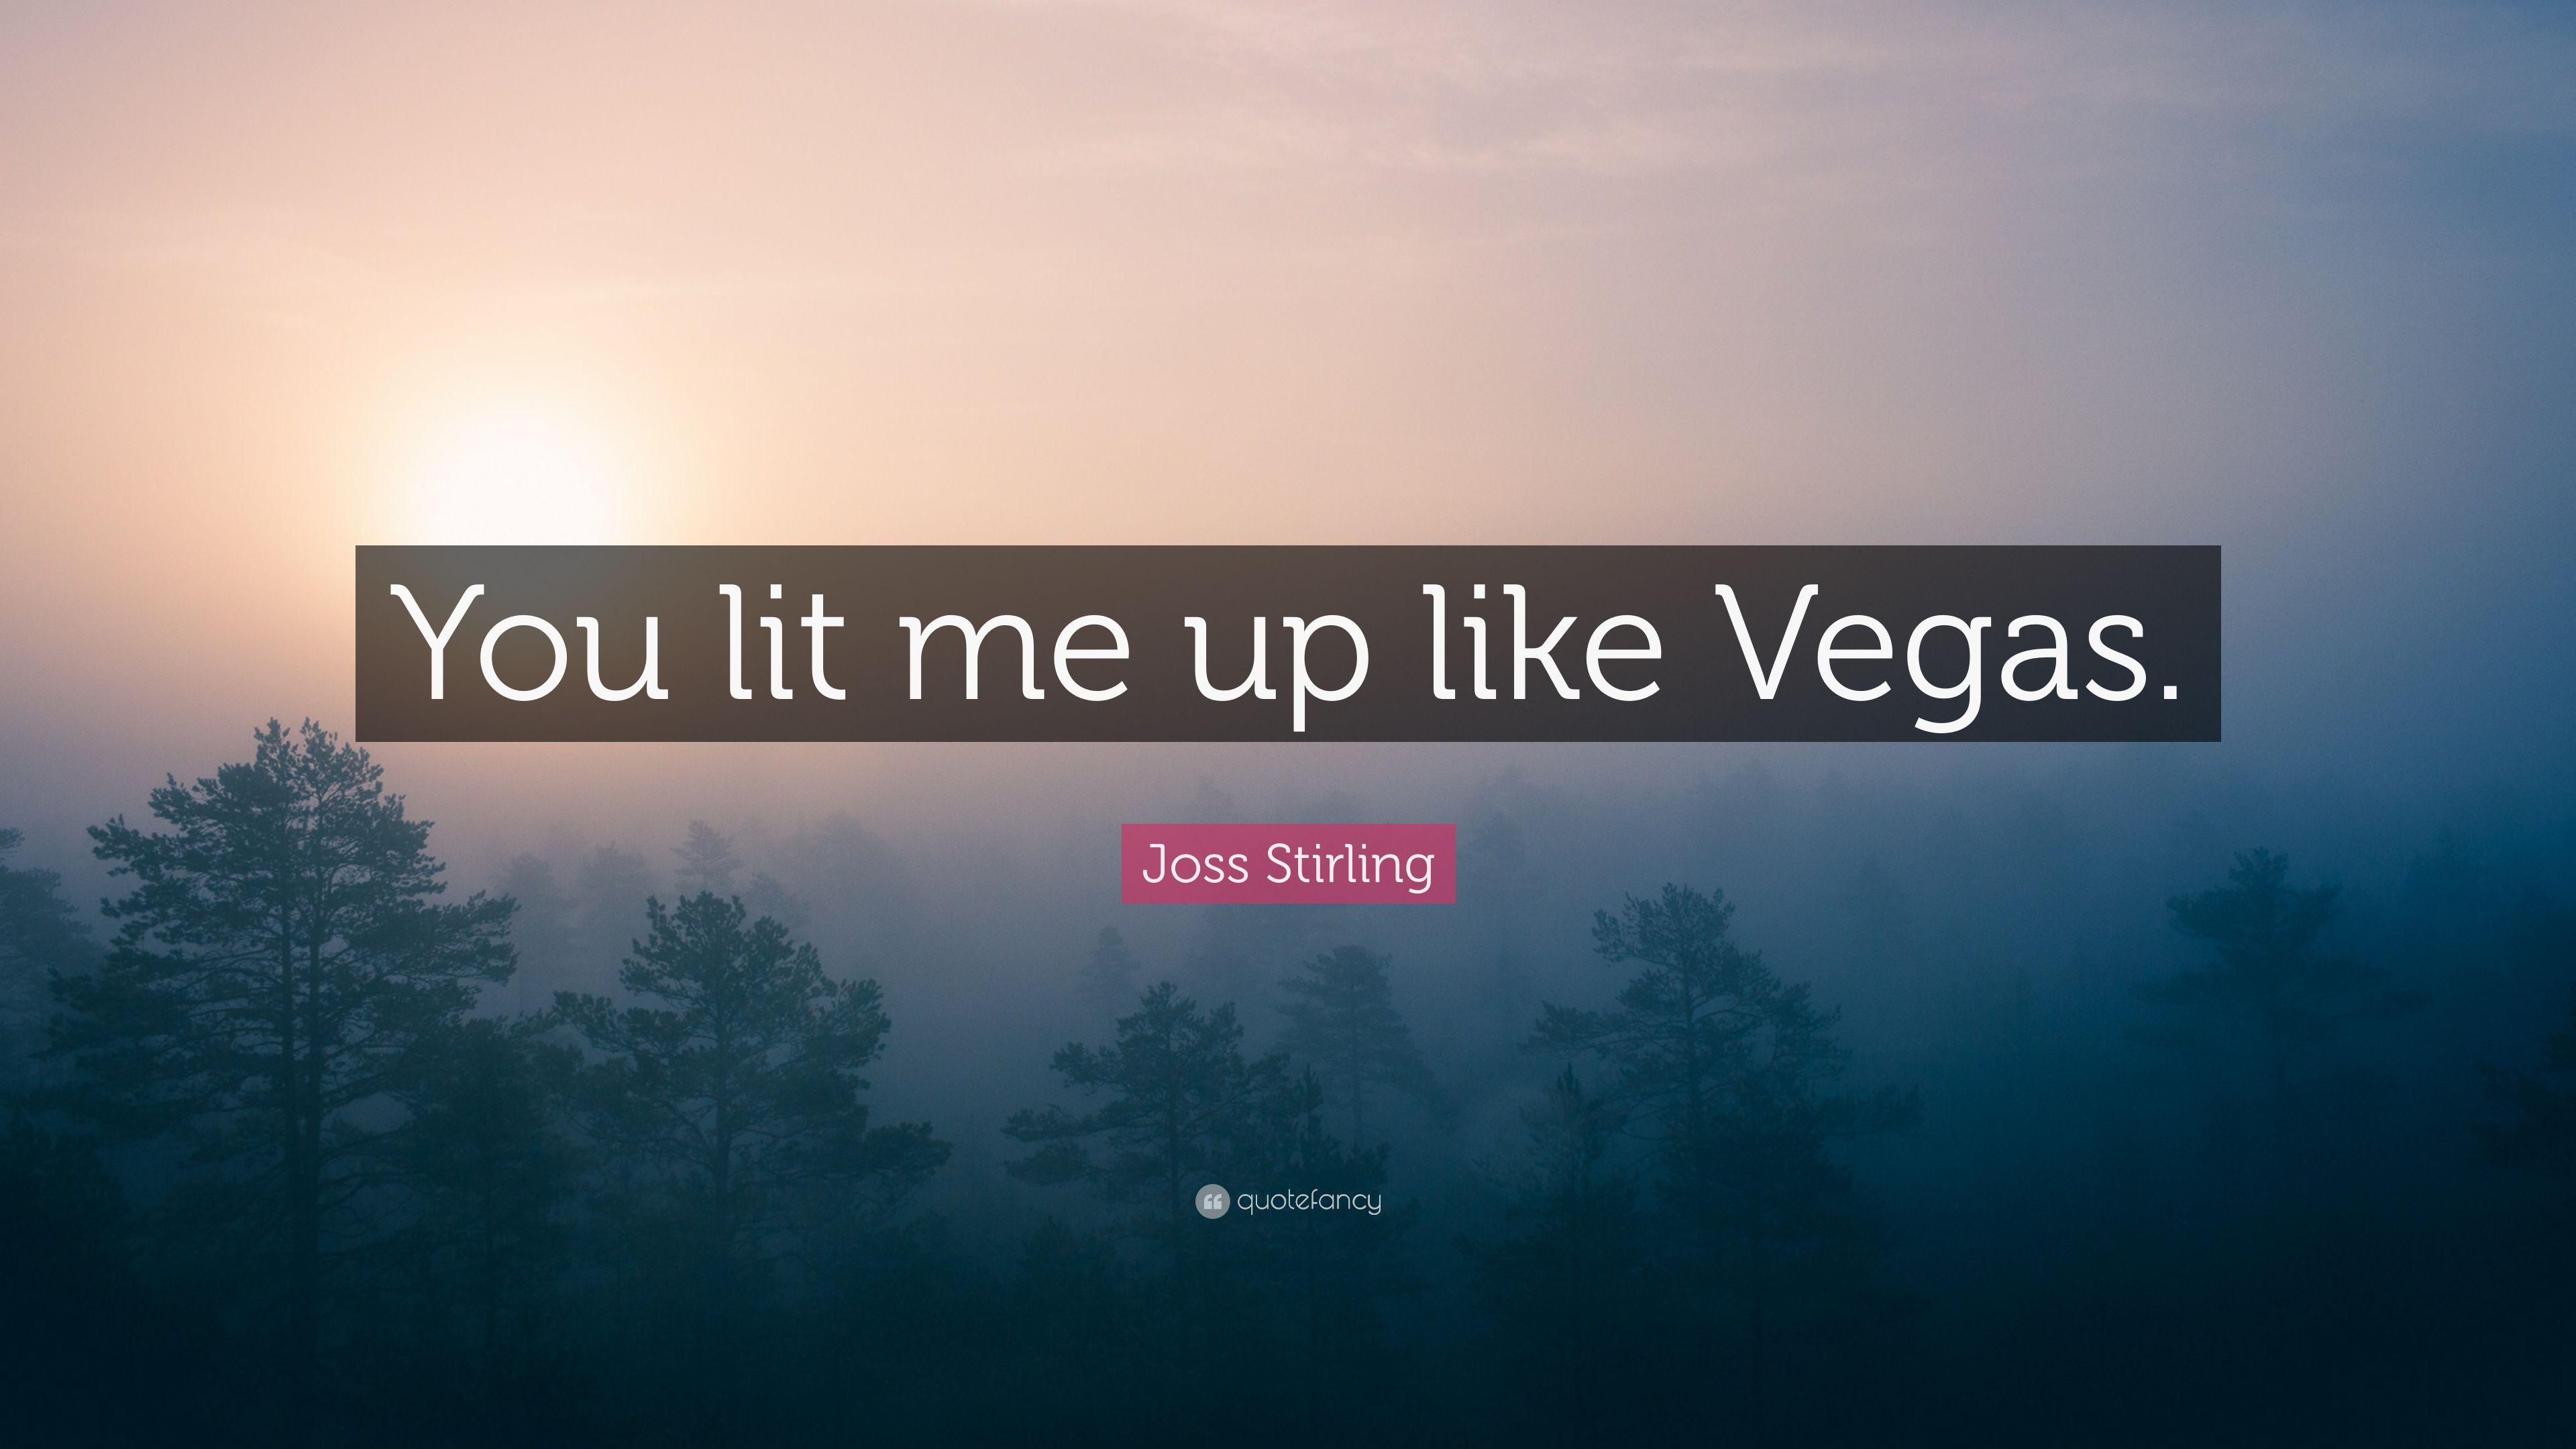 Joss Stirling Quote: “You lit me up like Vegas.” 7 wallpaper